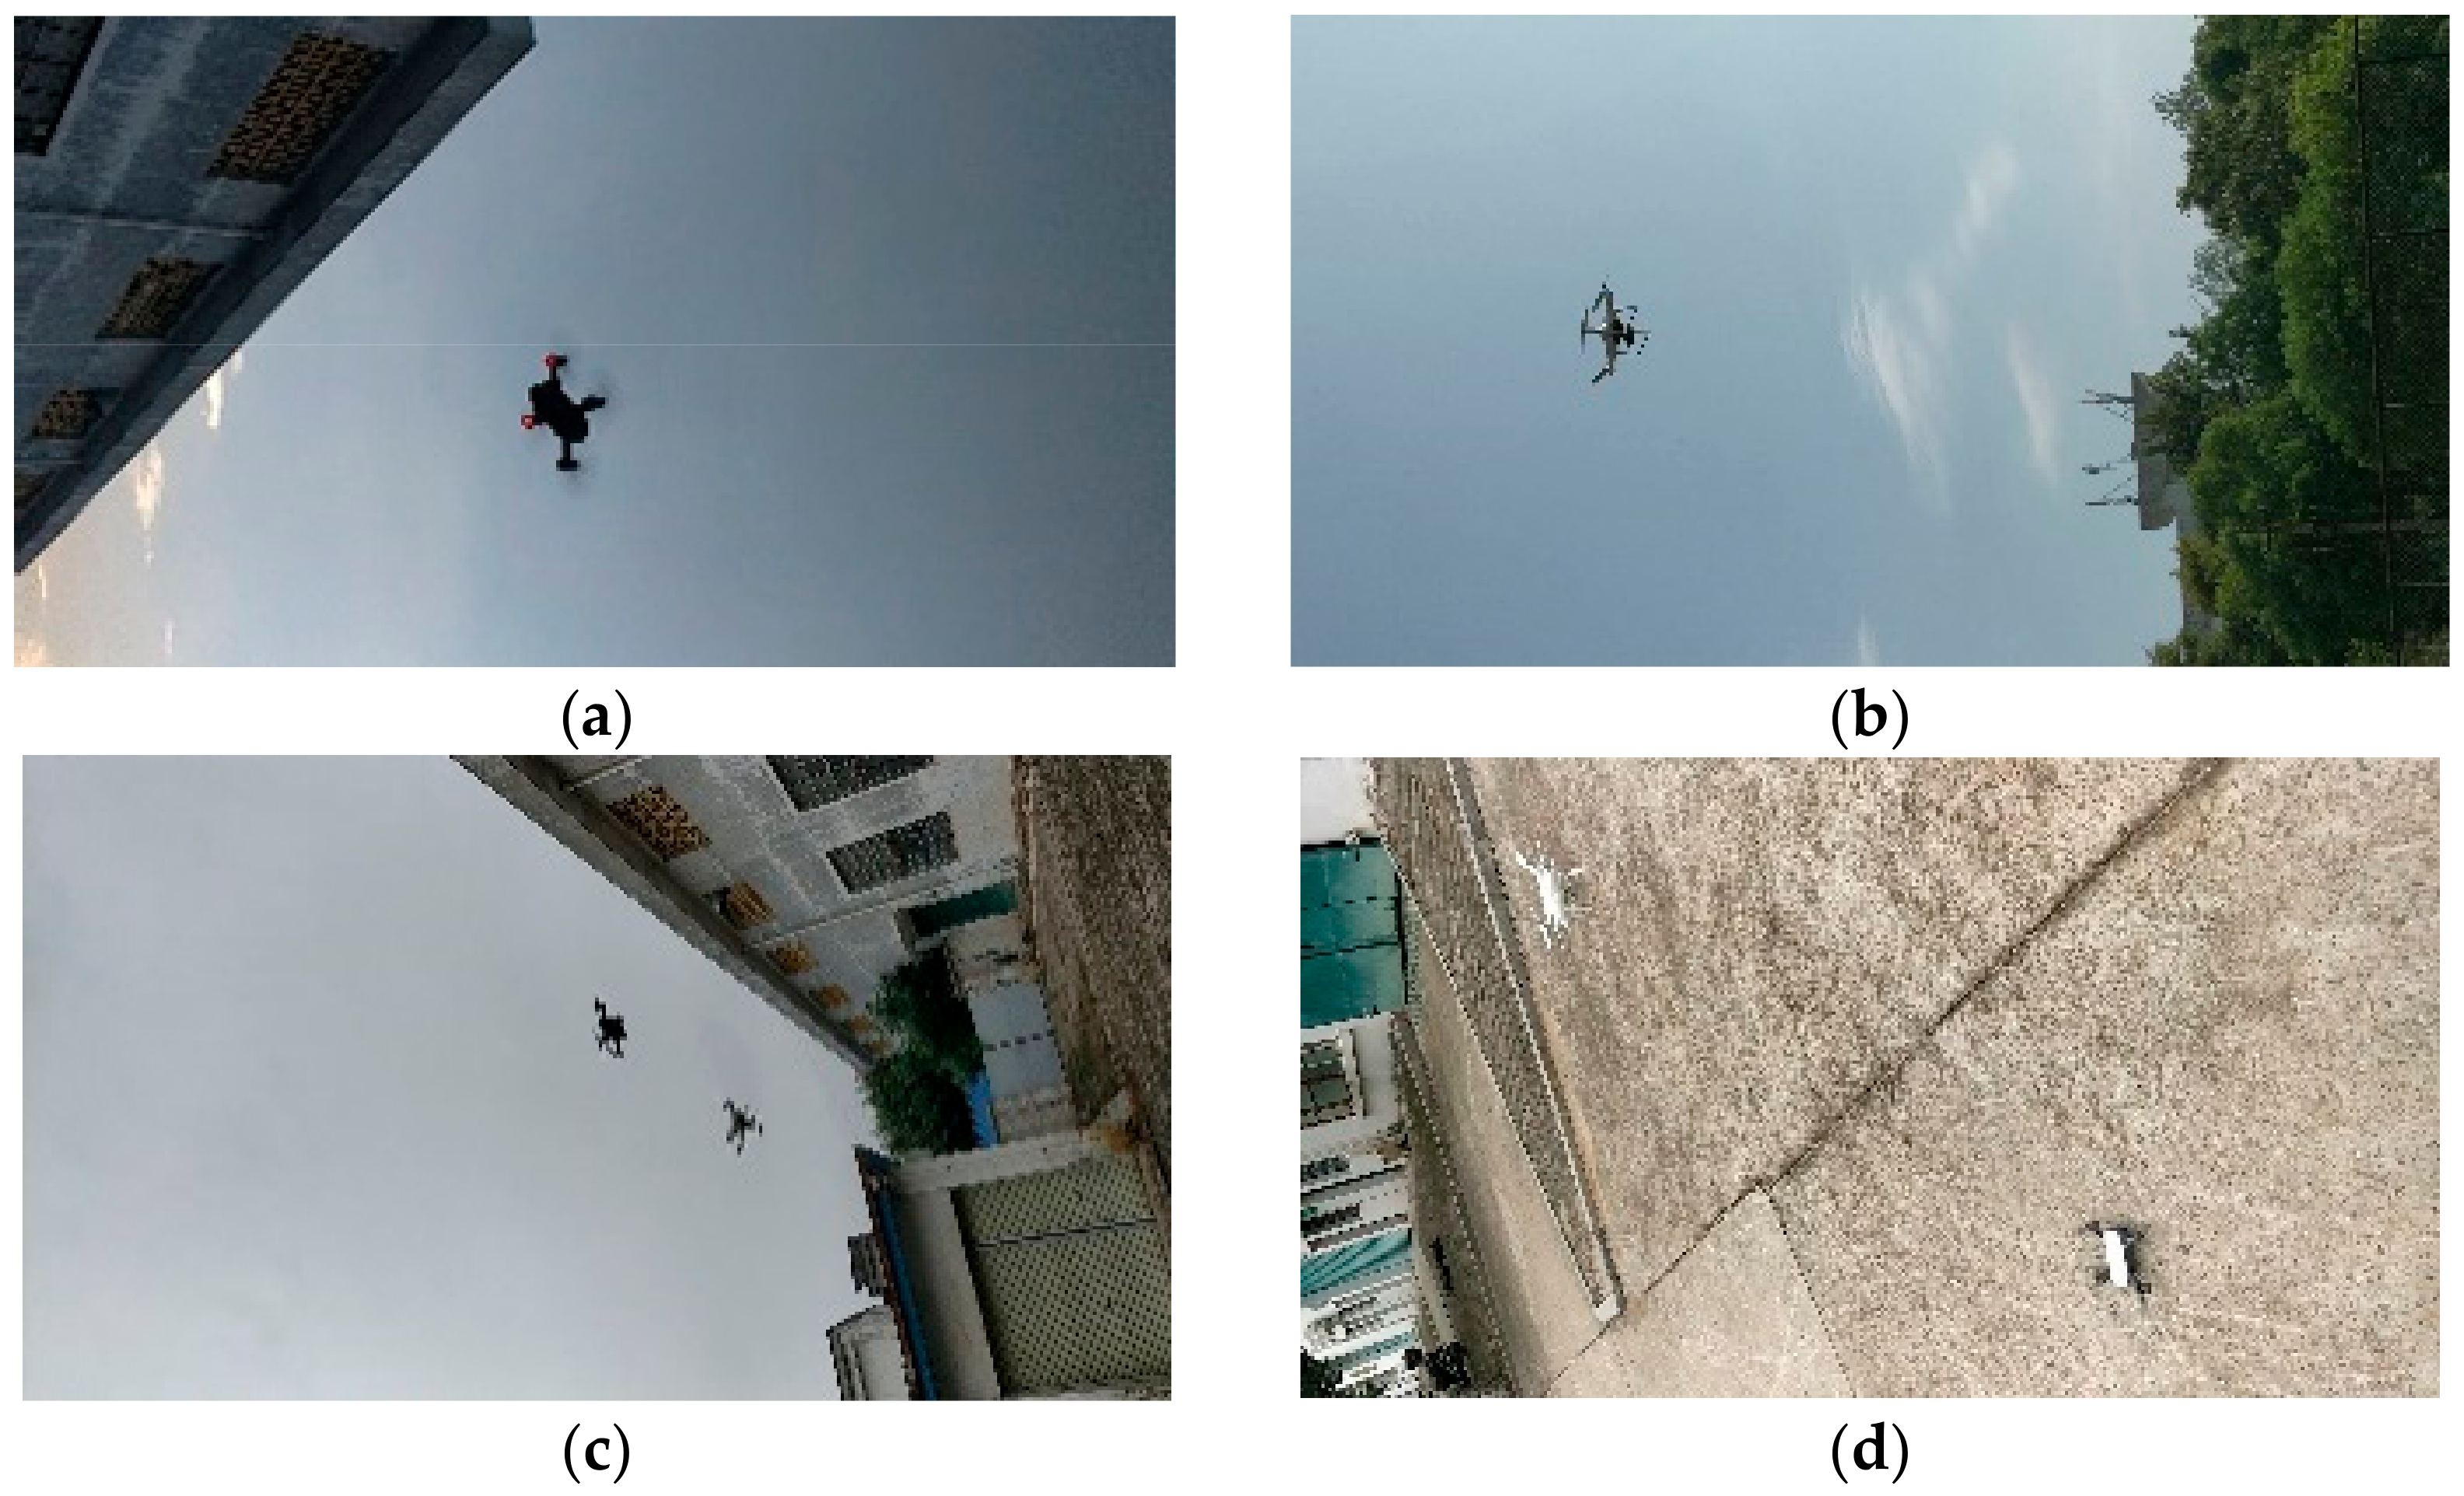 Micromachines | Free Full-Text | Real-Time Detection of Drones Using  Channel and Layer Pruning, Based on the YOLOv3-SPP3 Deep Learning Algorithm